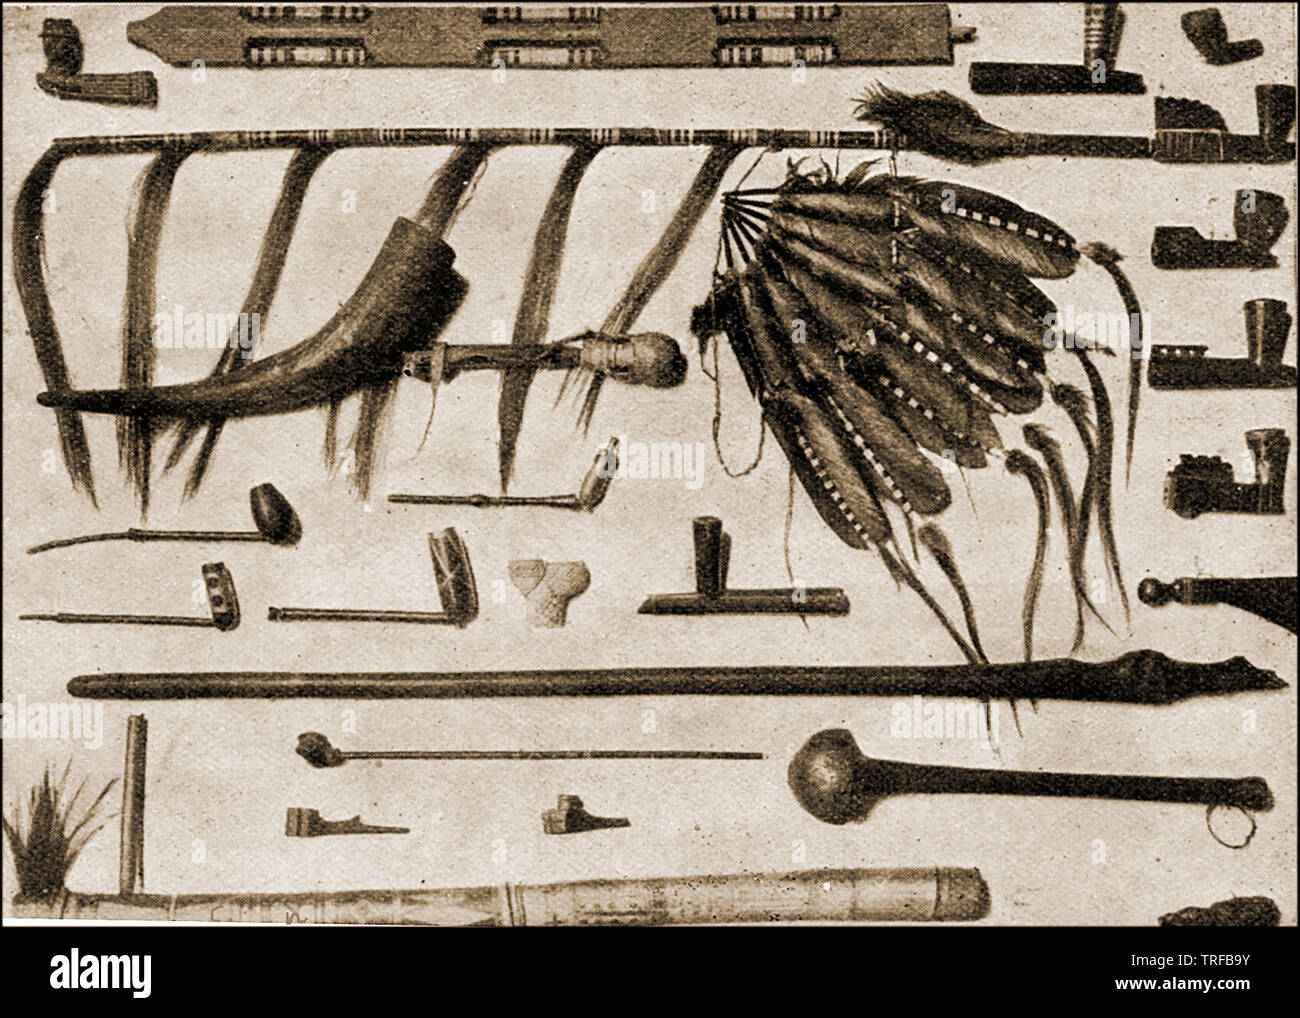 1909 illustration showing native American Indian weapons,artifacts and smoking equipment. Stock Photo